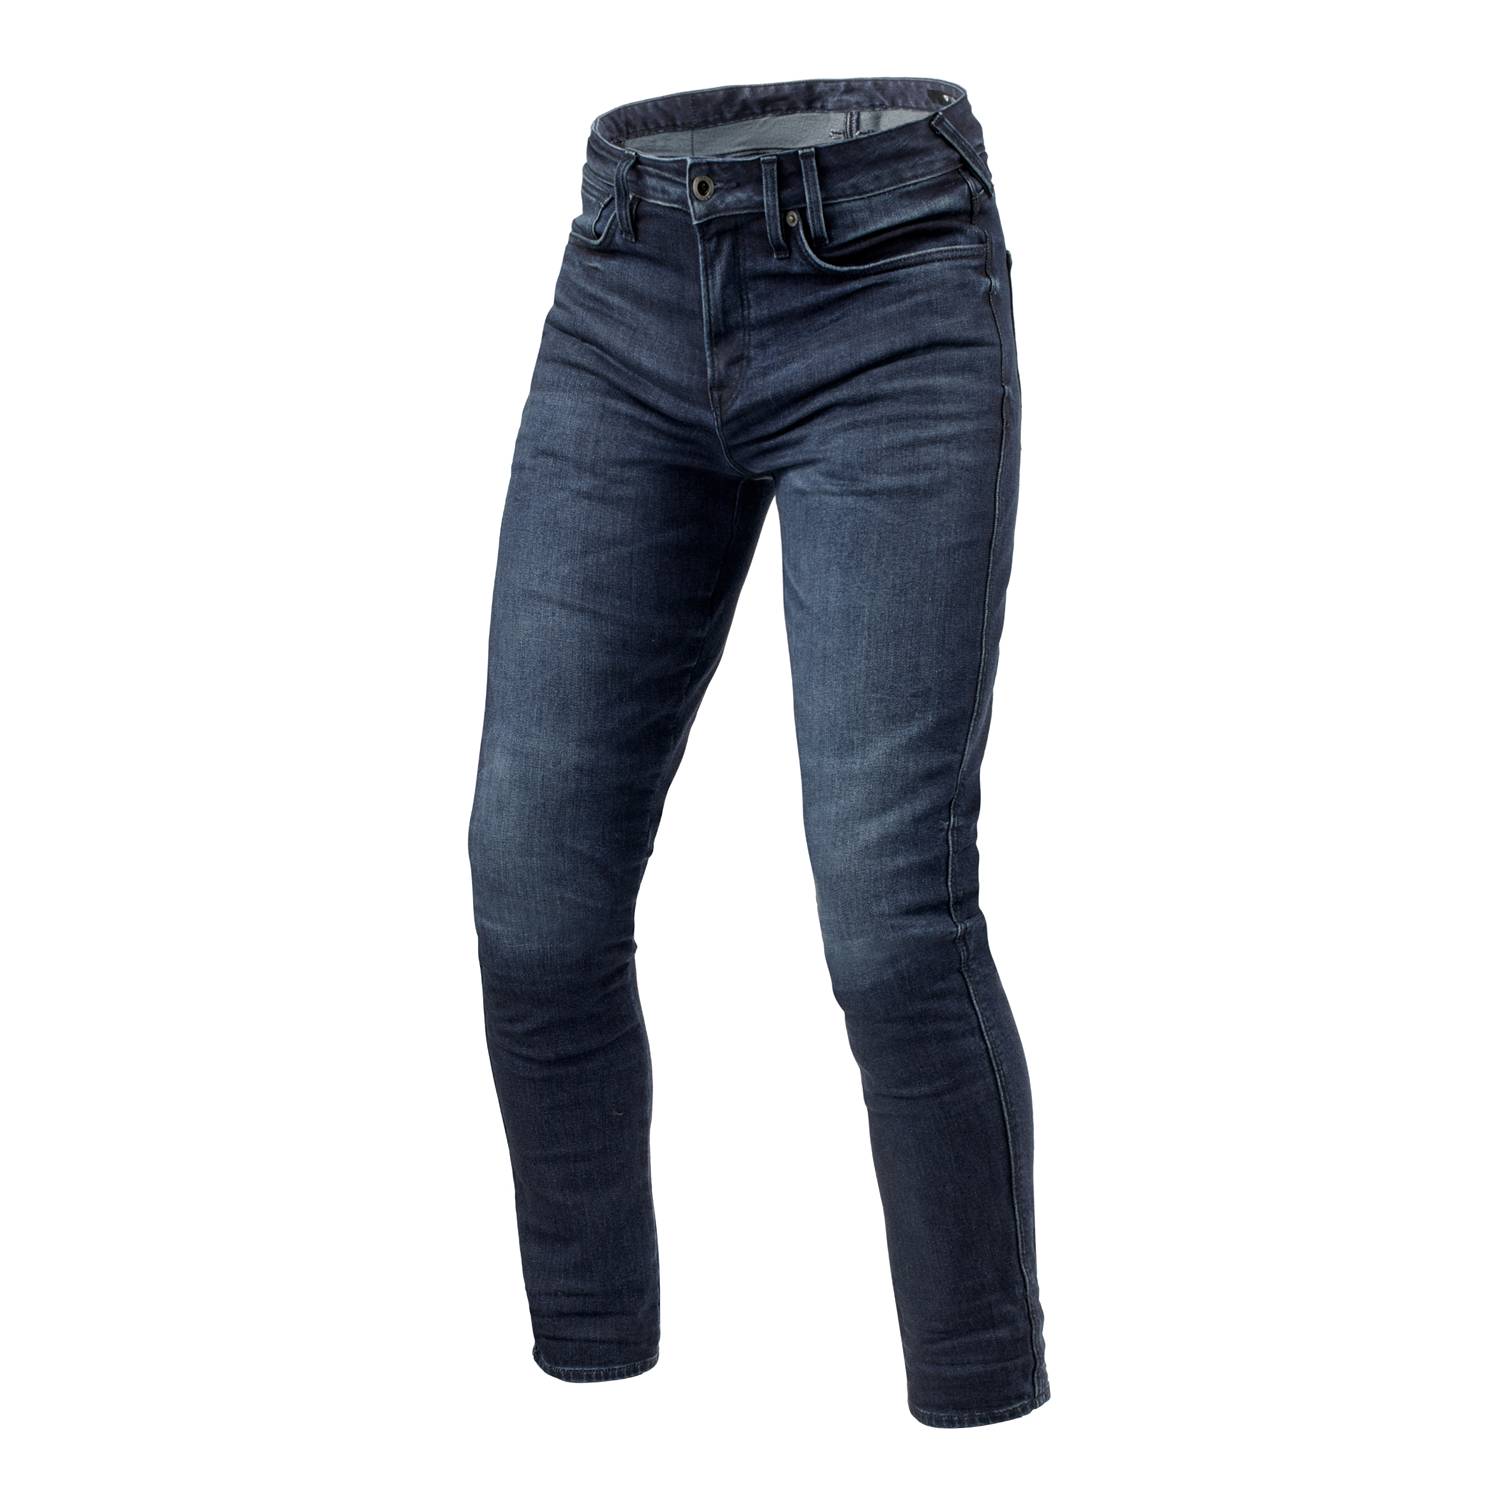 Image of EU REV'IT! Jeans Carlin SK Dark Blue Used L34 Motorcycle Jeans Taille L34/W33